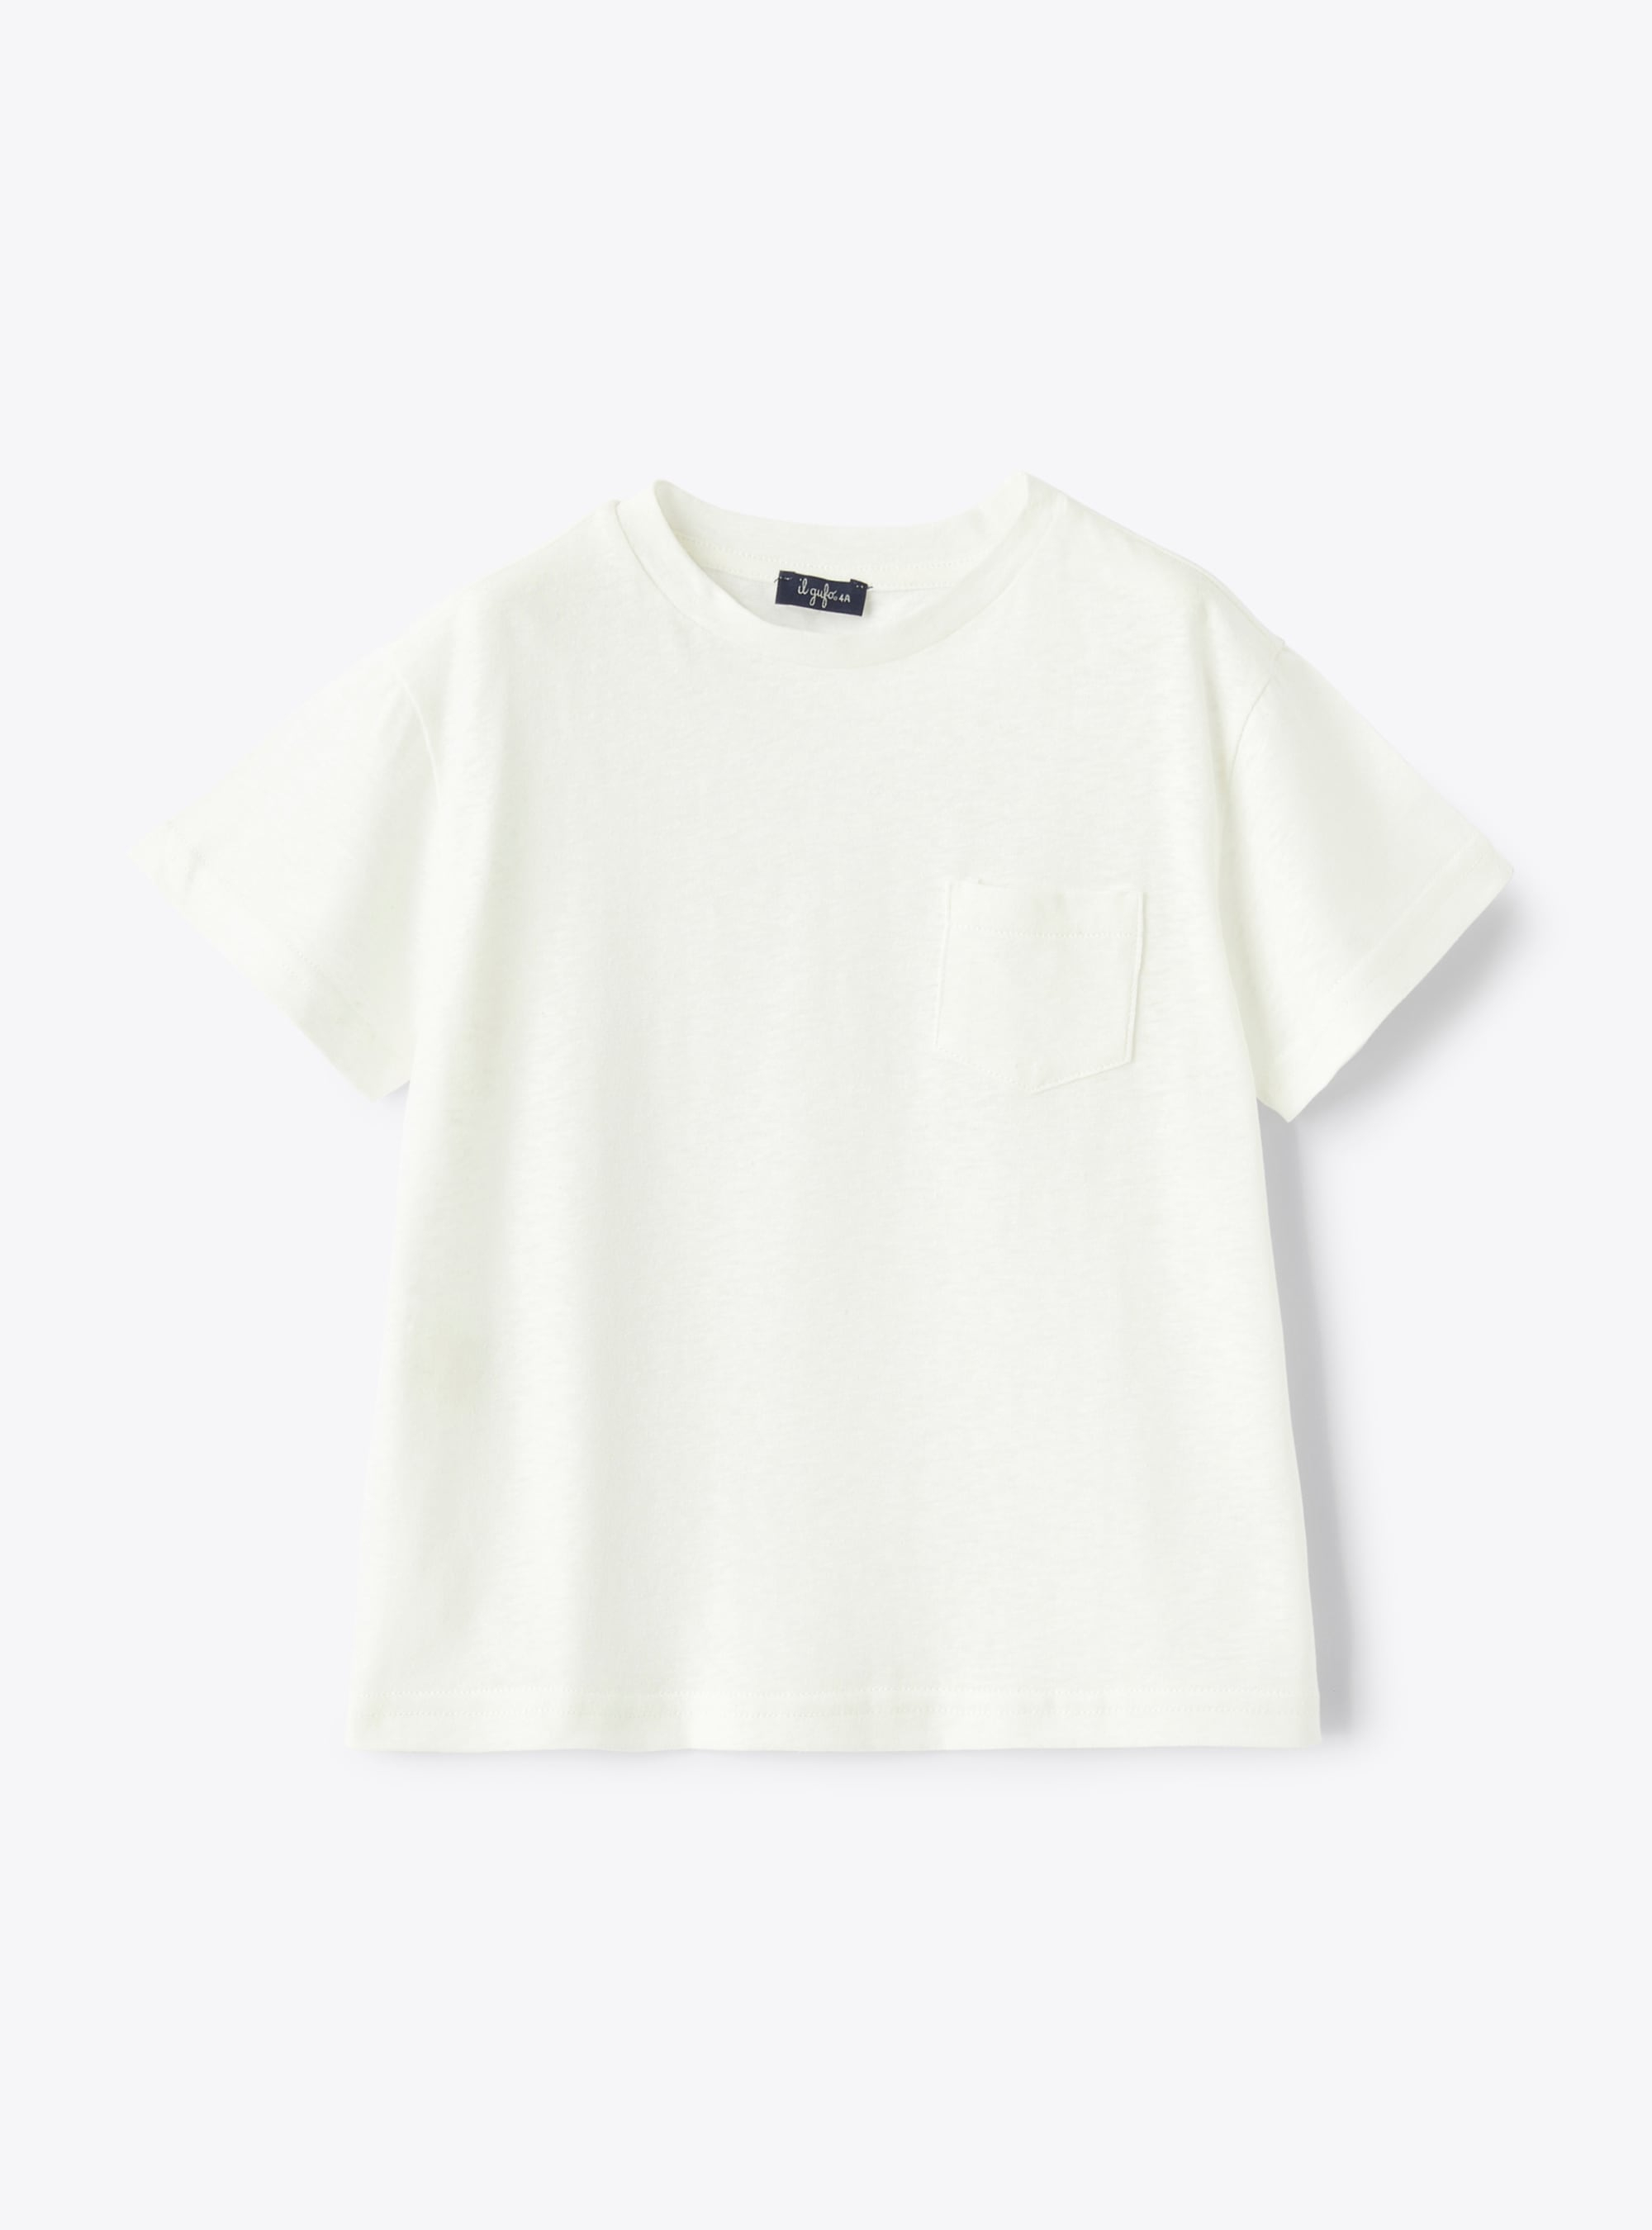 T-shirt in cotton and linen - T-shirts - Il Gufo